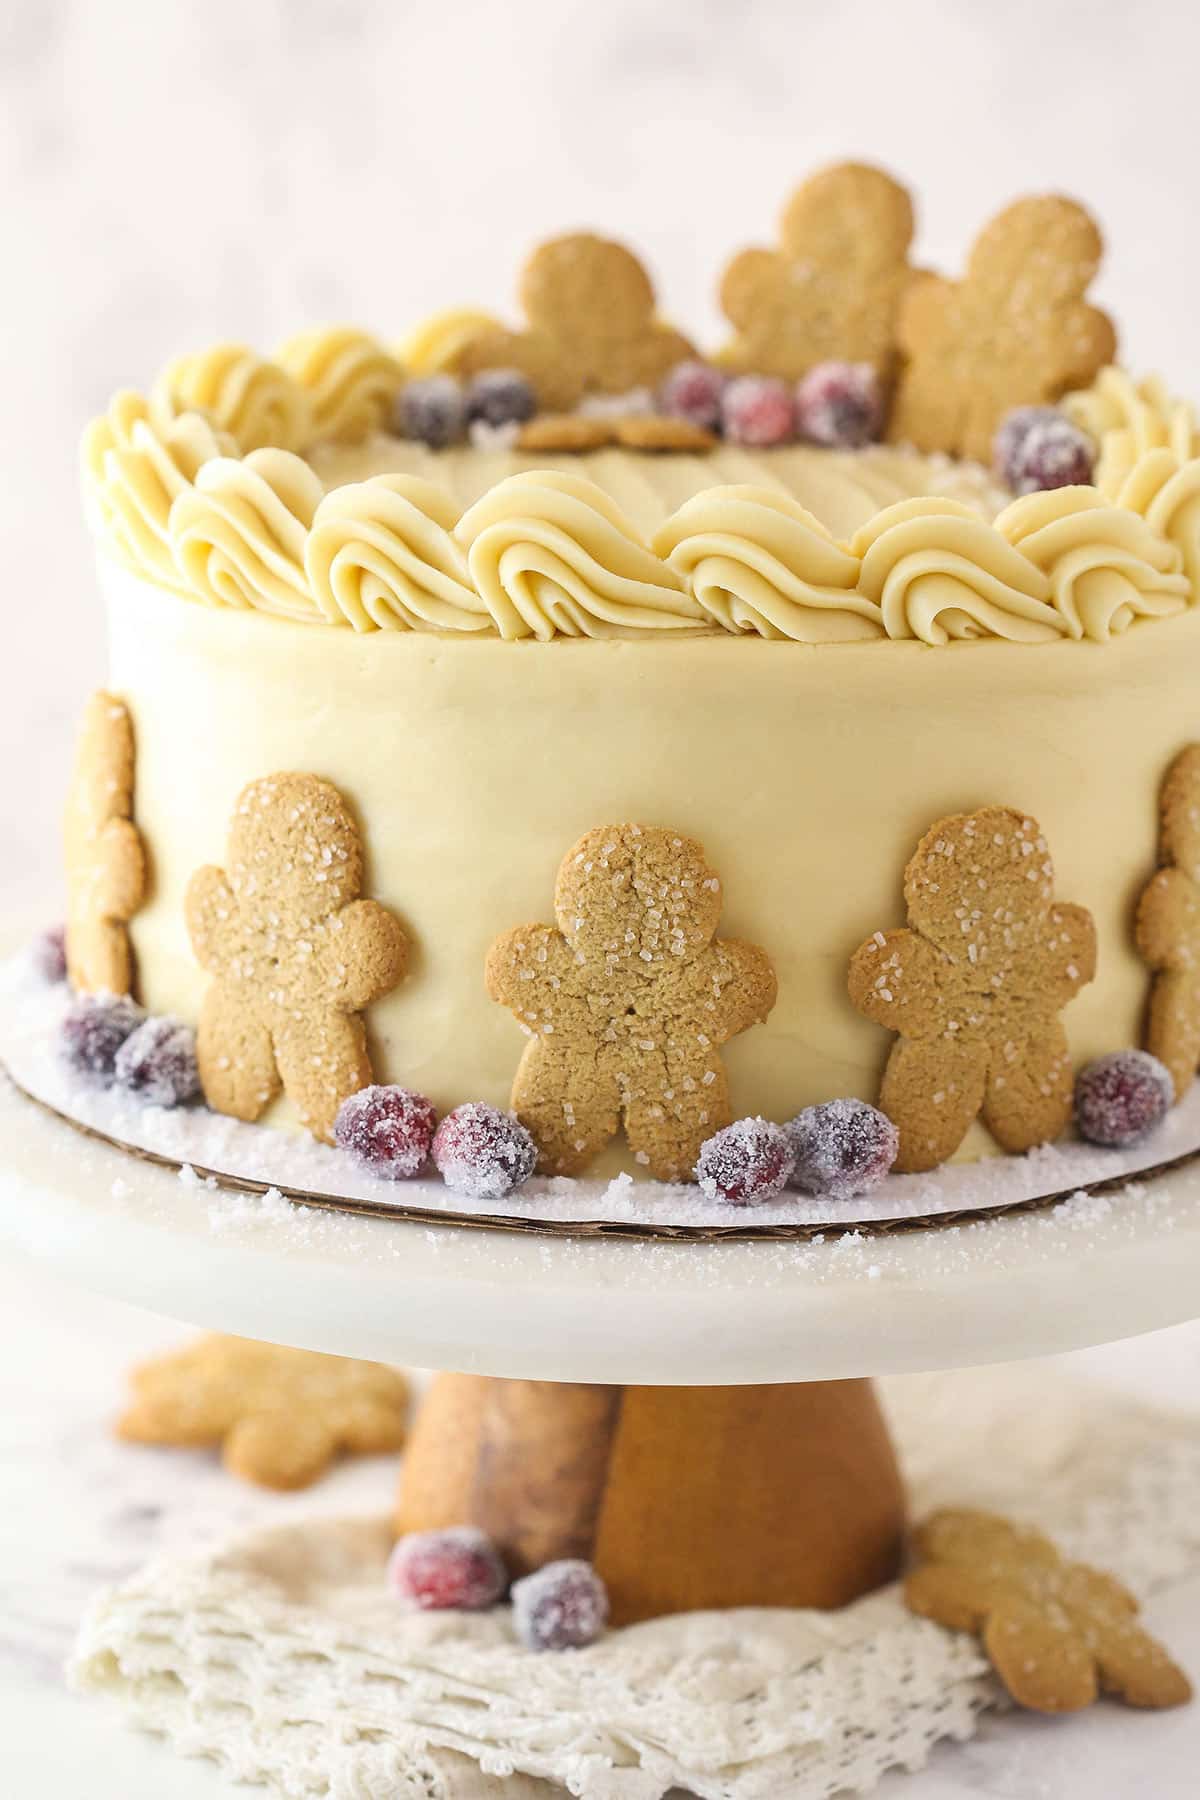 Gingerbread layer cake on a cake stand garnished with gingerbread men and sugared cranberries.